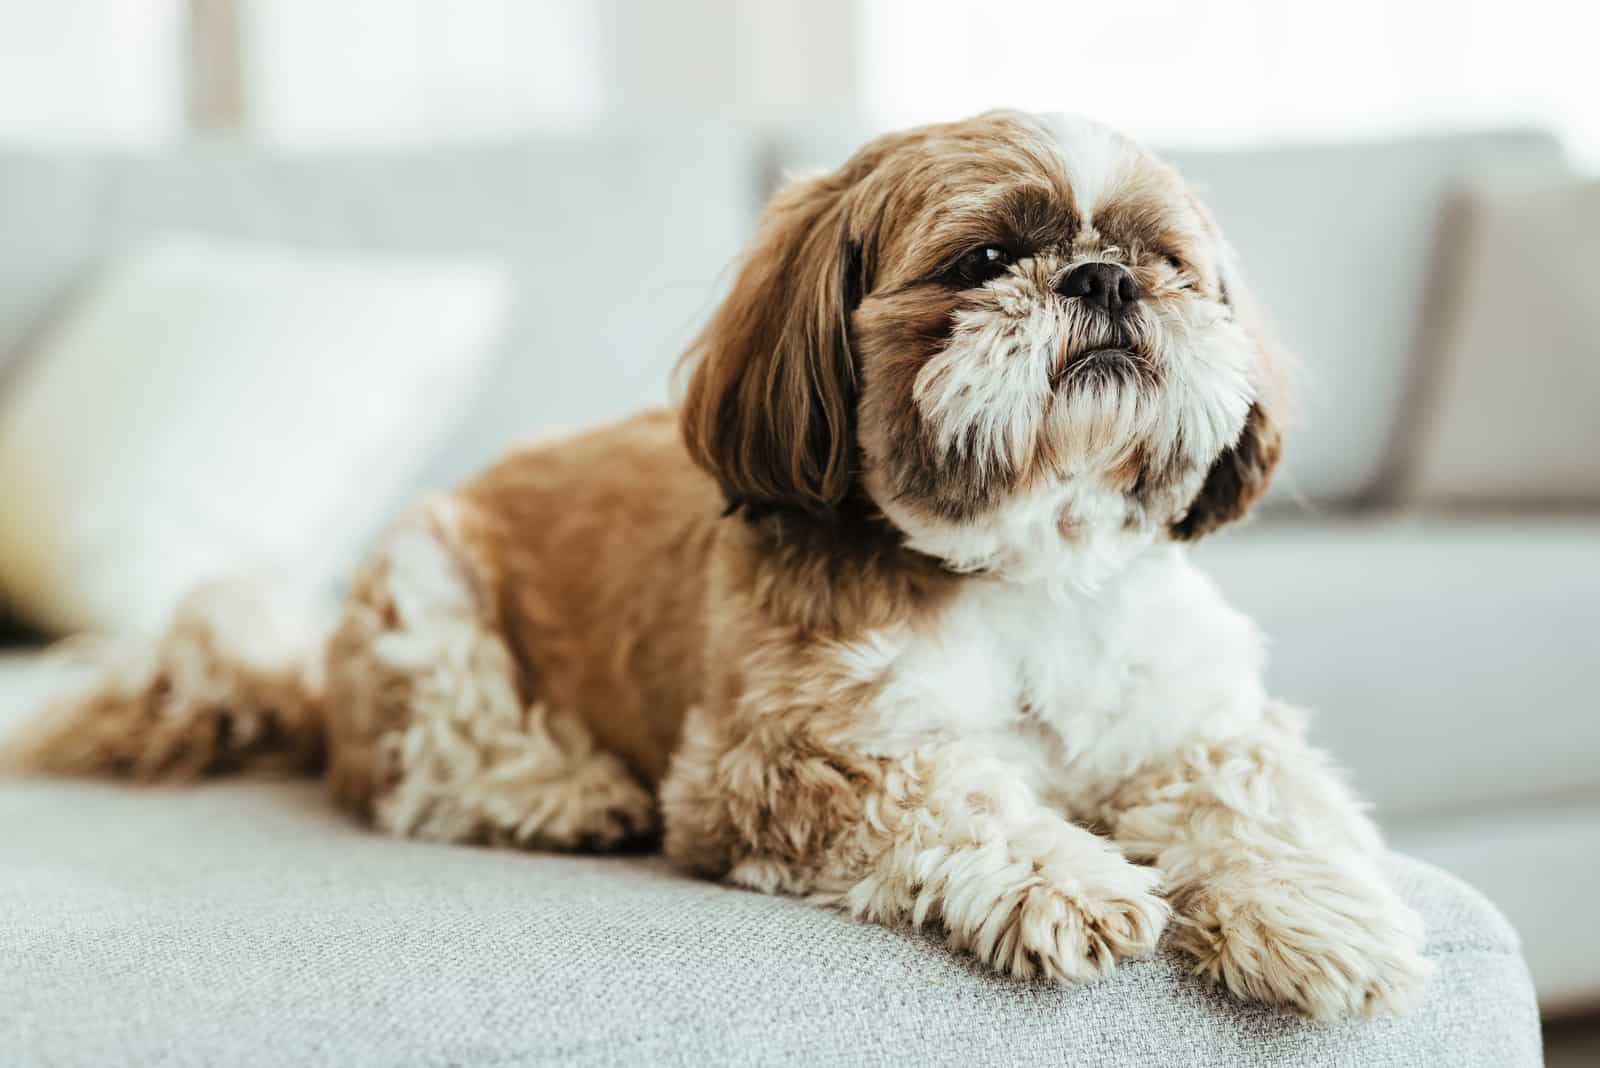 The Shih-Tzu dog lies on the sofa in the living room